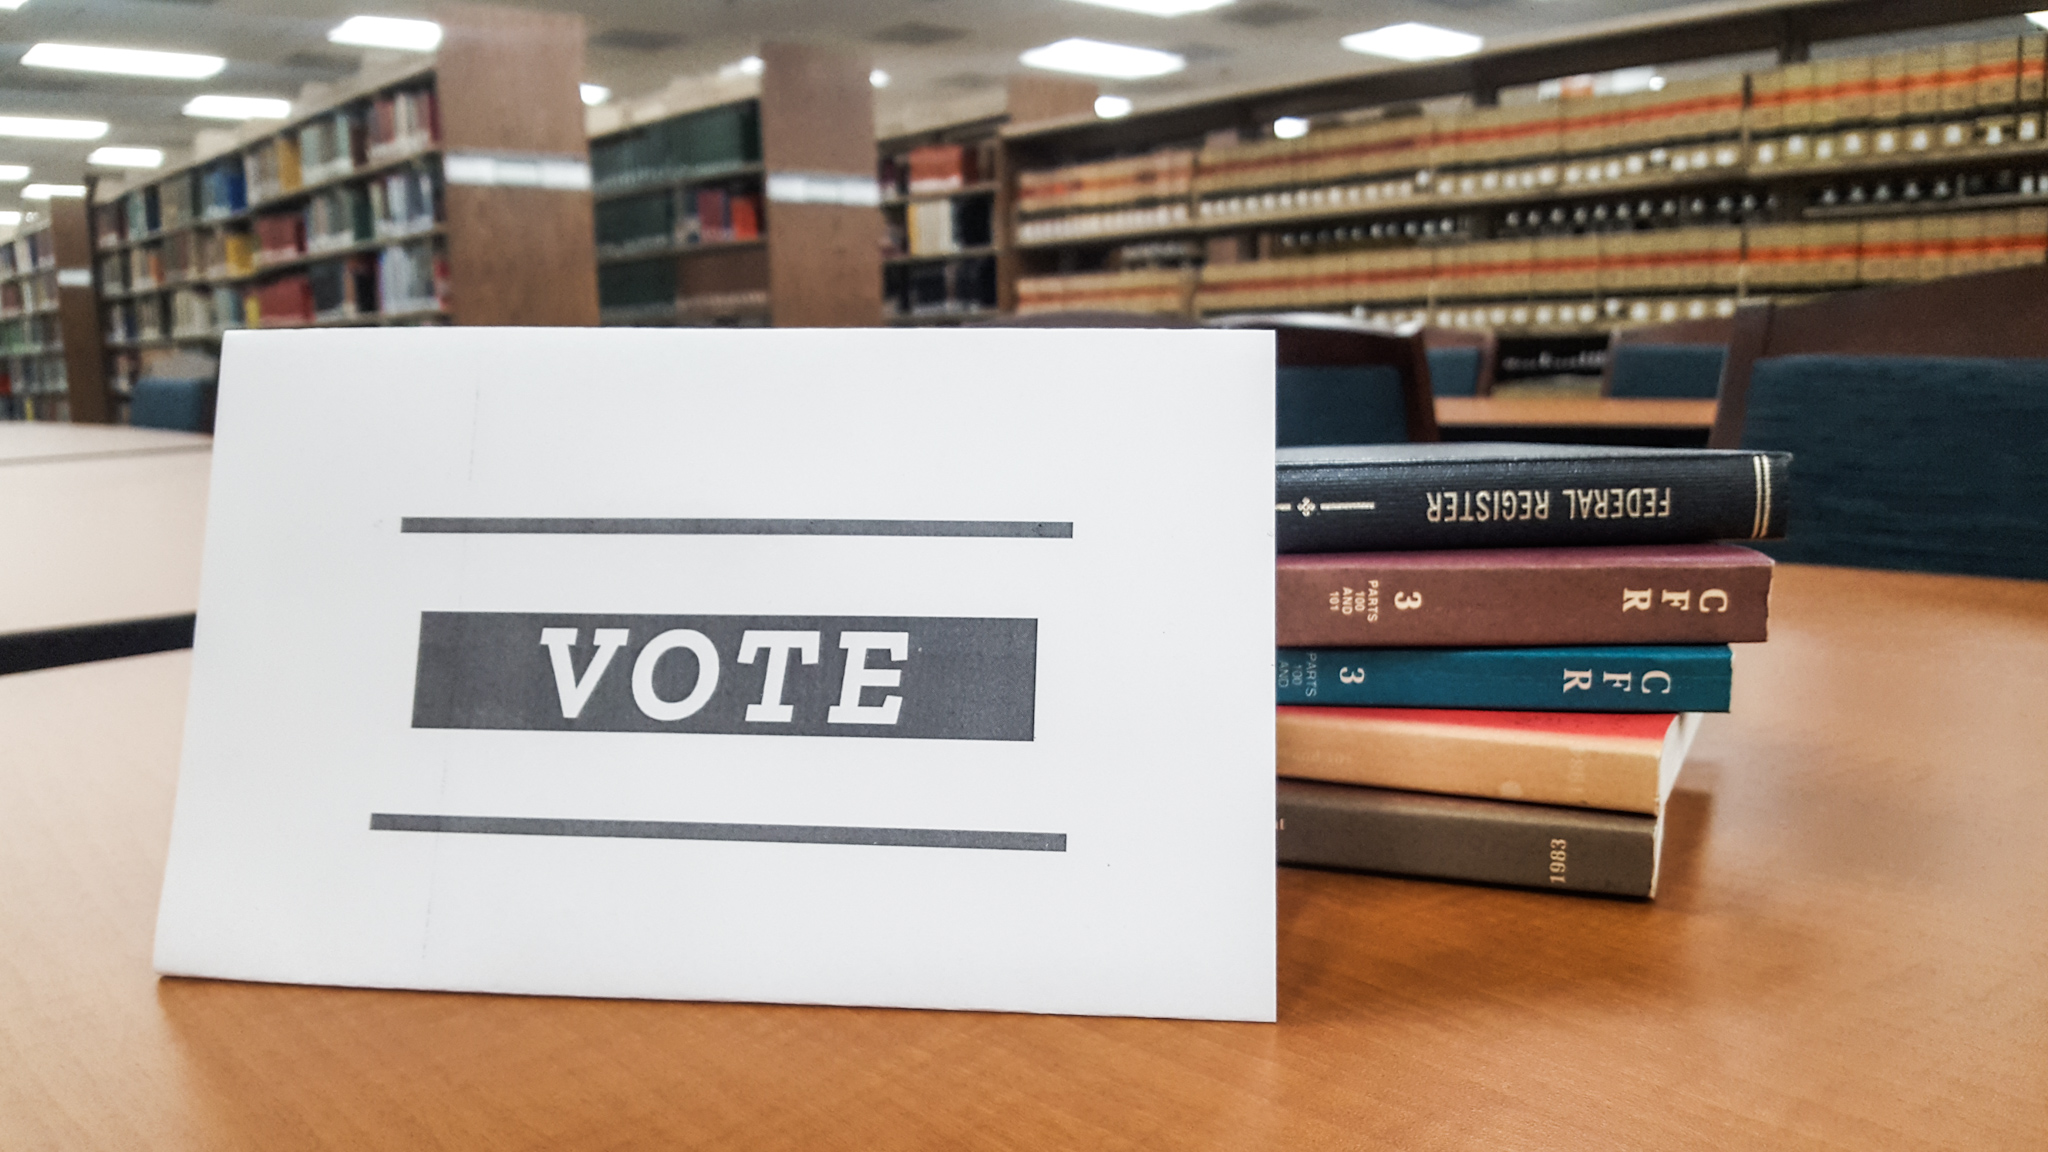 PHOTO: A vote sign placed against books in library. Photo by The Signal Reporter Aldana Reyes.